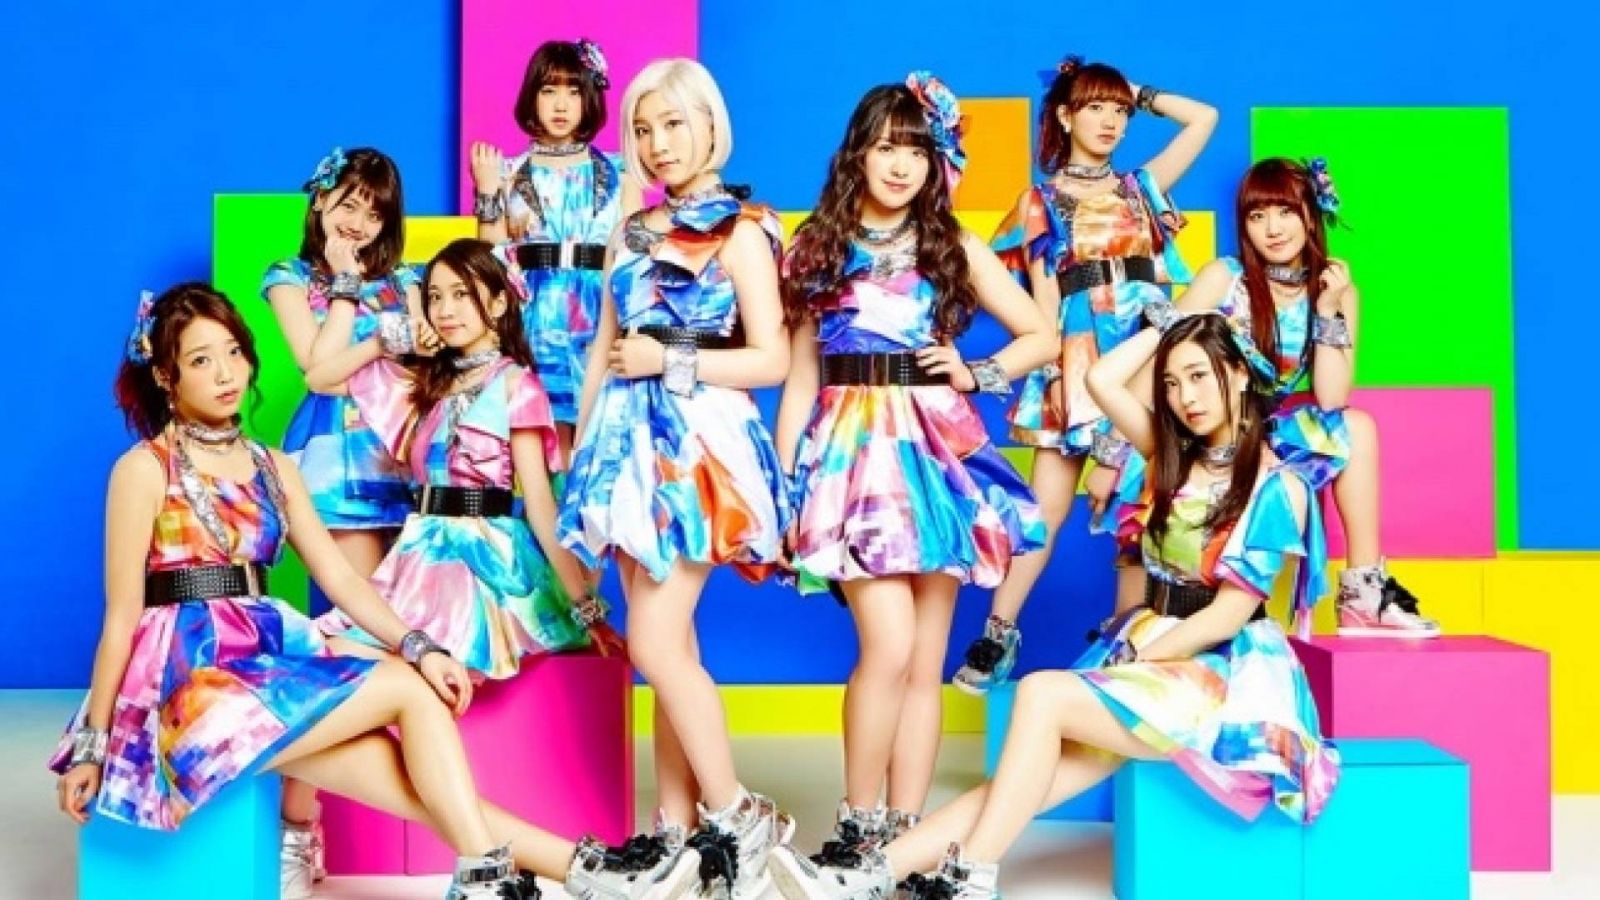 Interview with Cheeky Parade © avex